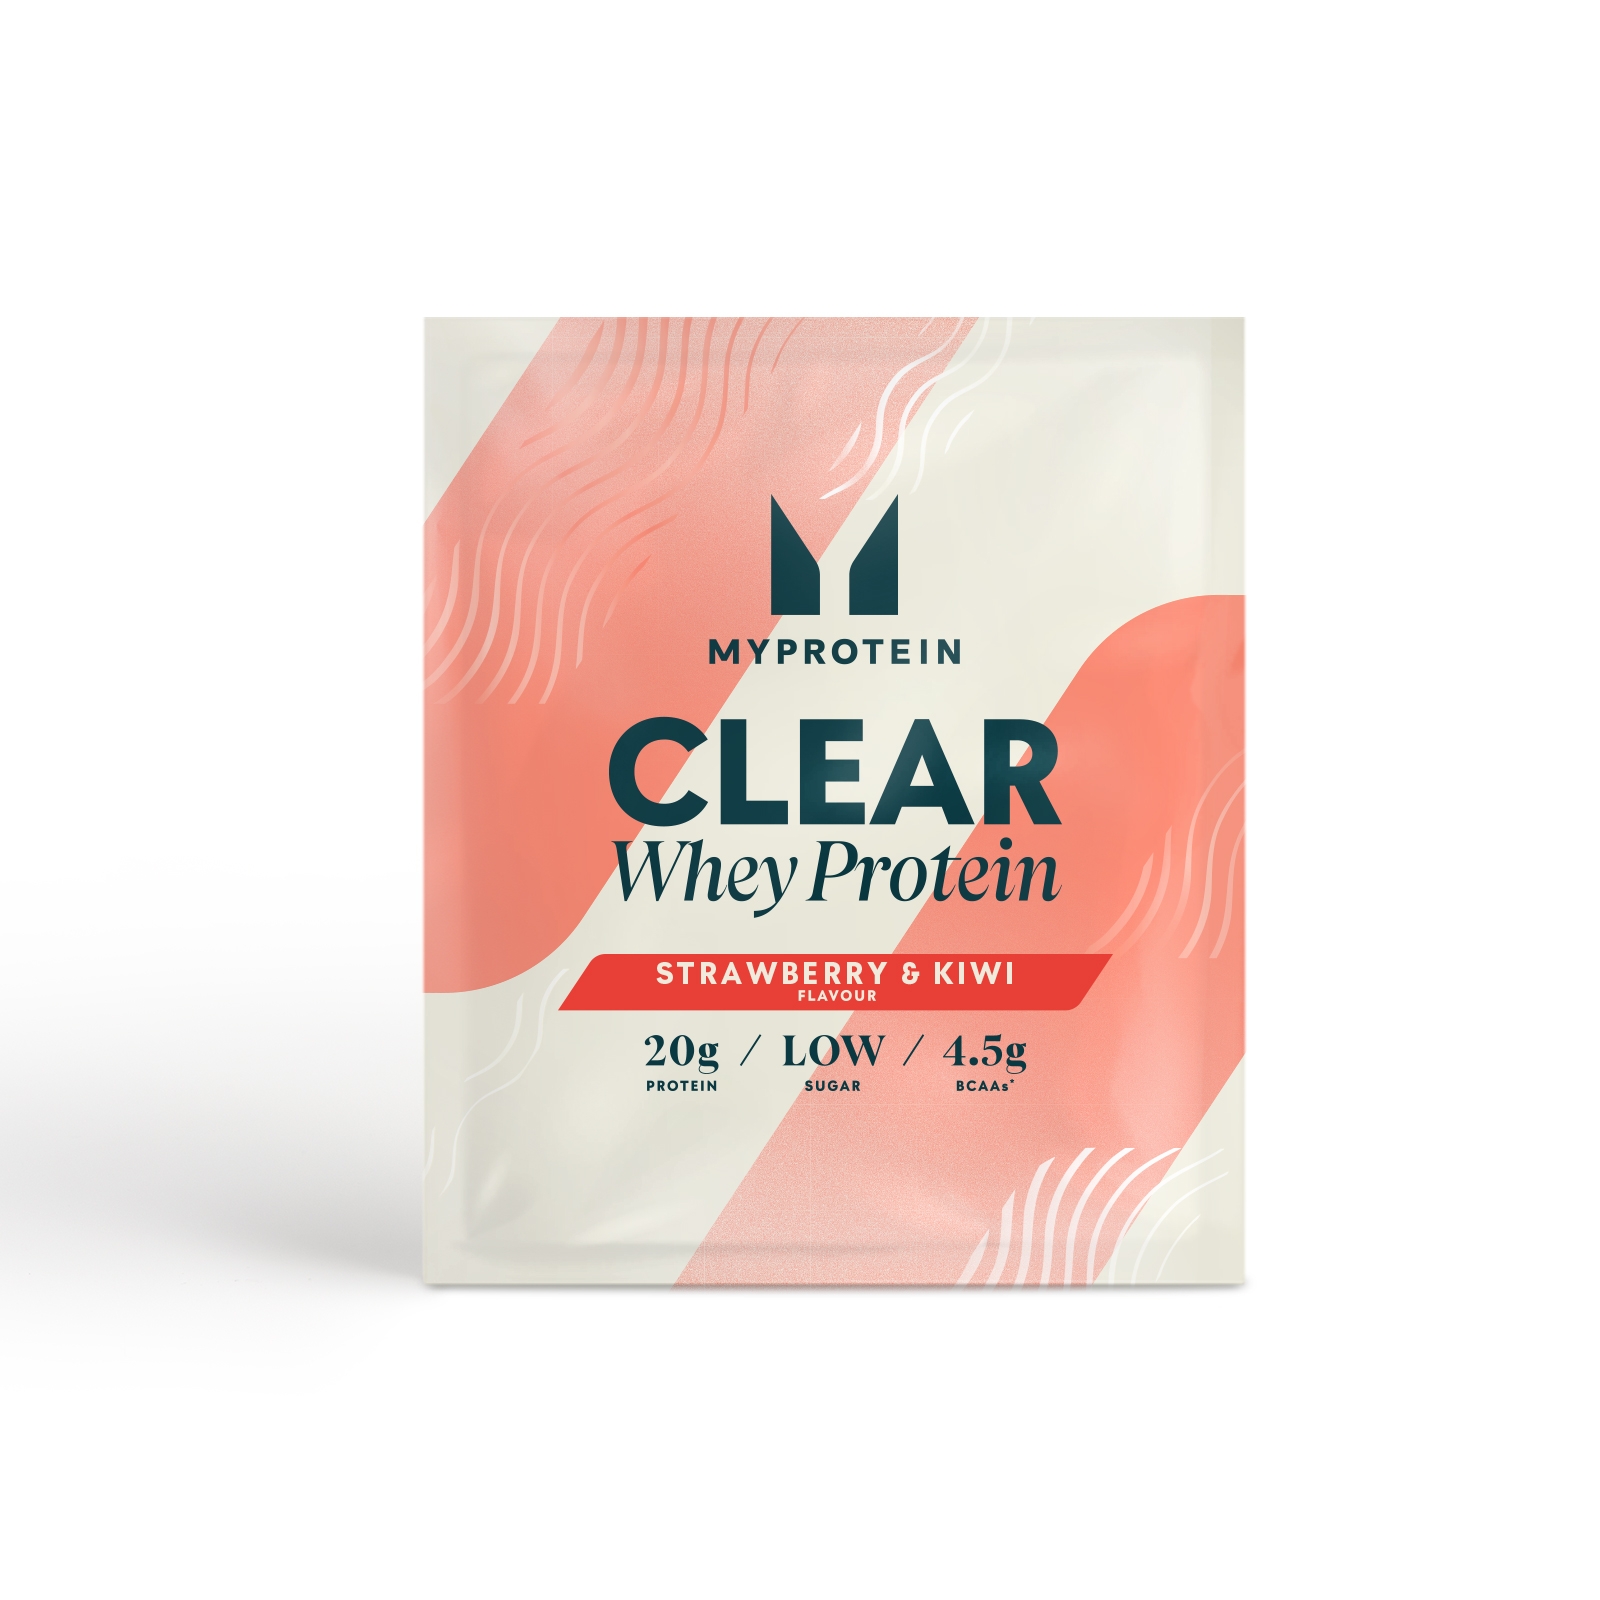 Myprotein Clear Whey Isolate (Sample) - 1servings - Strawberry Kiwi